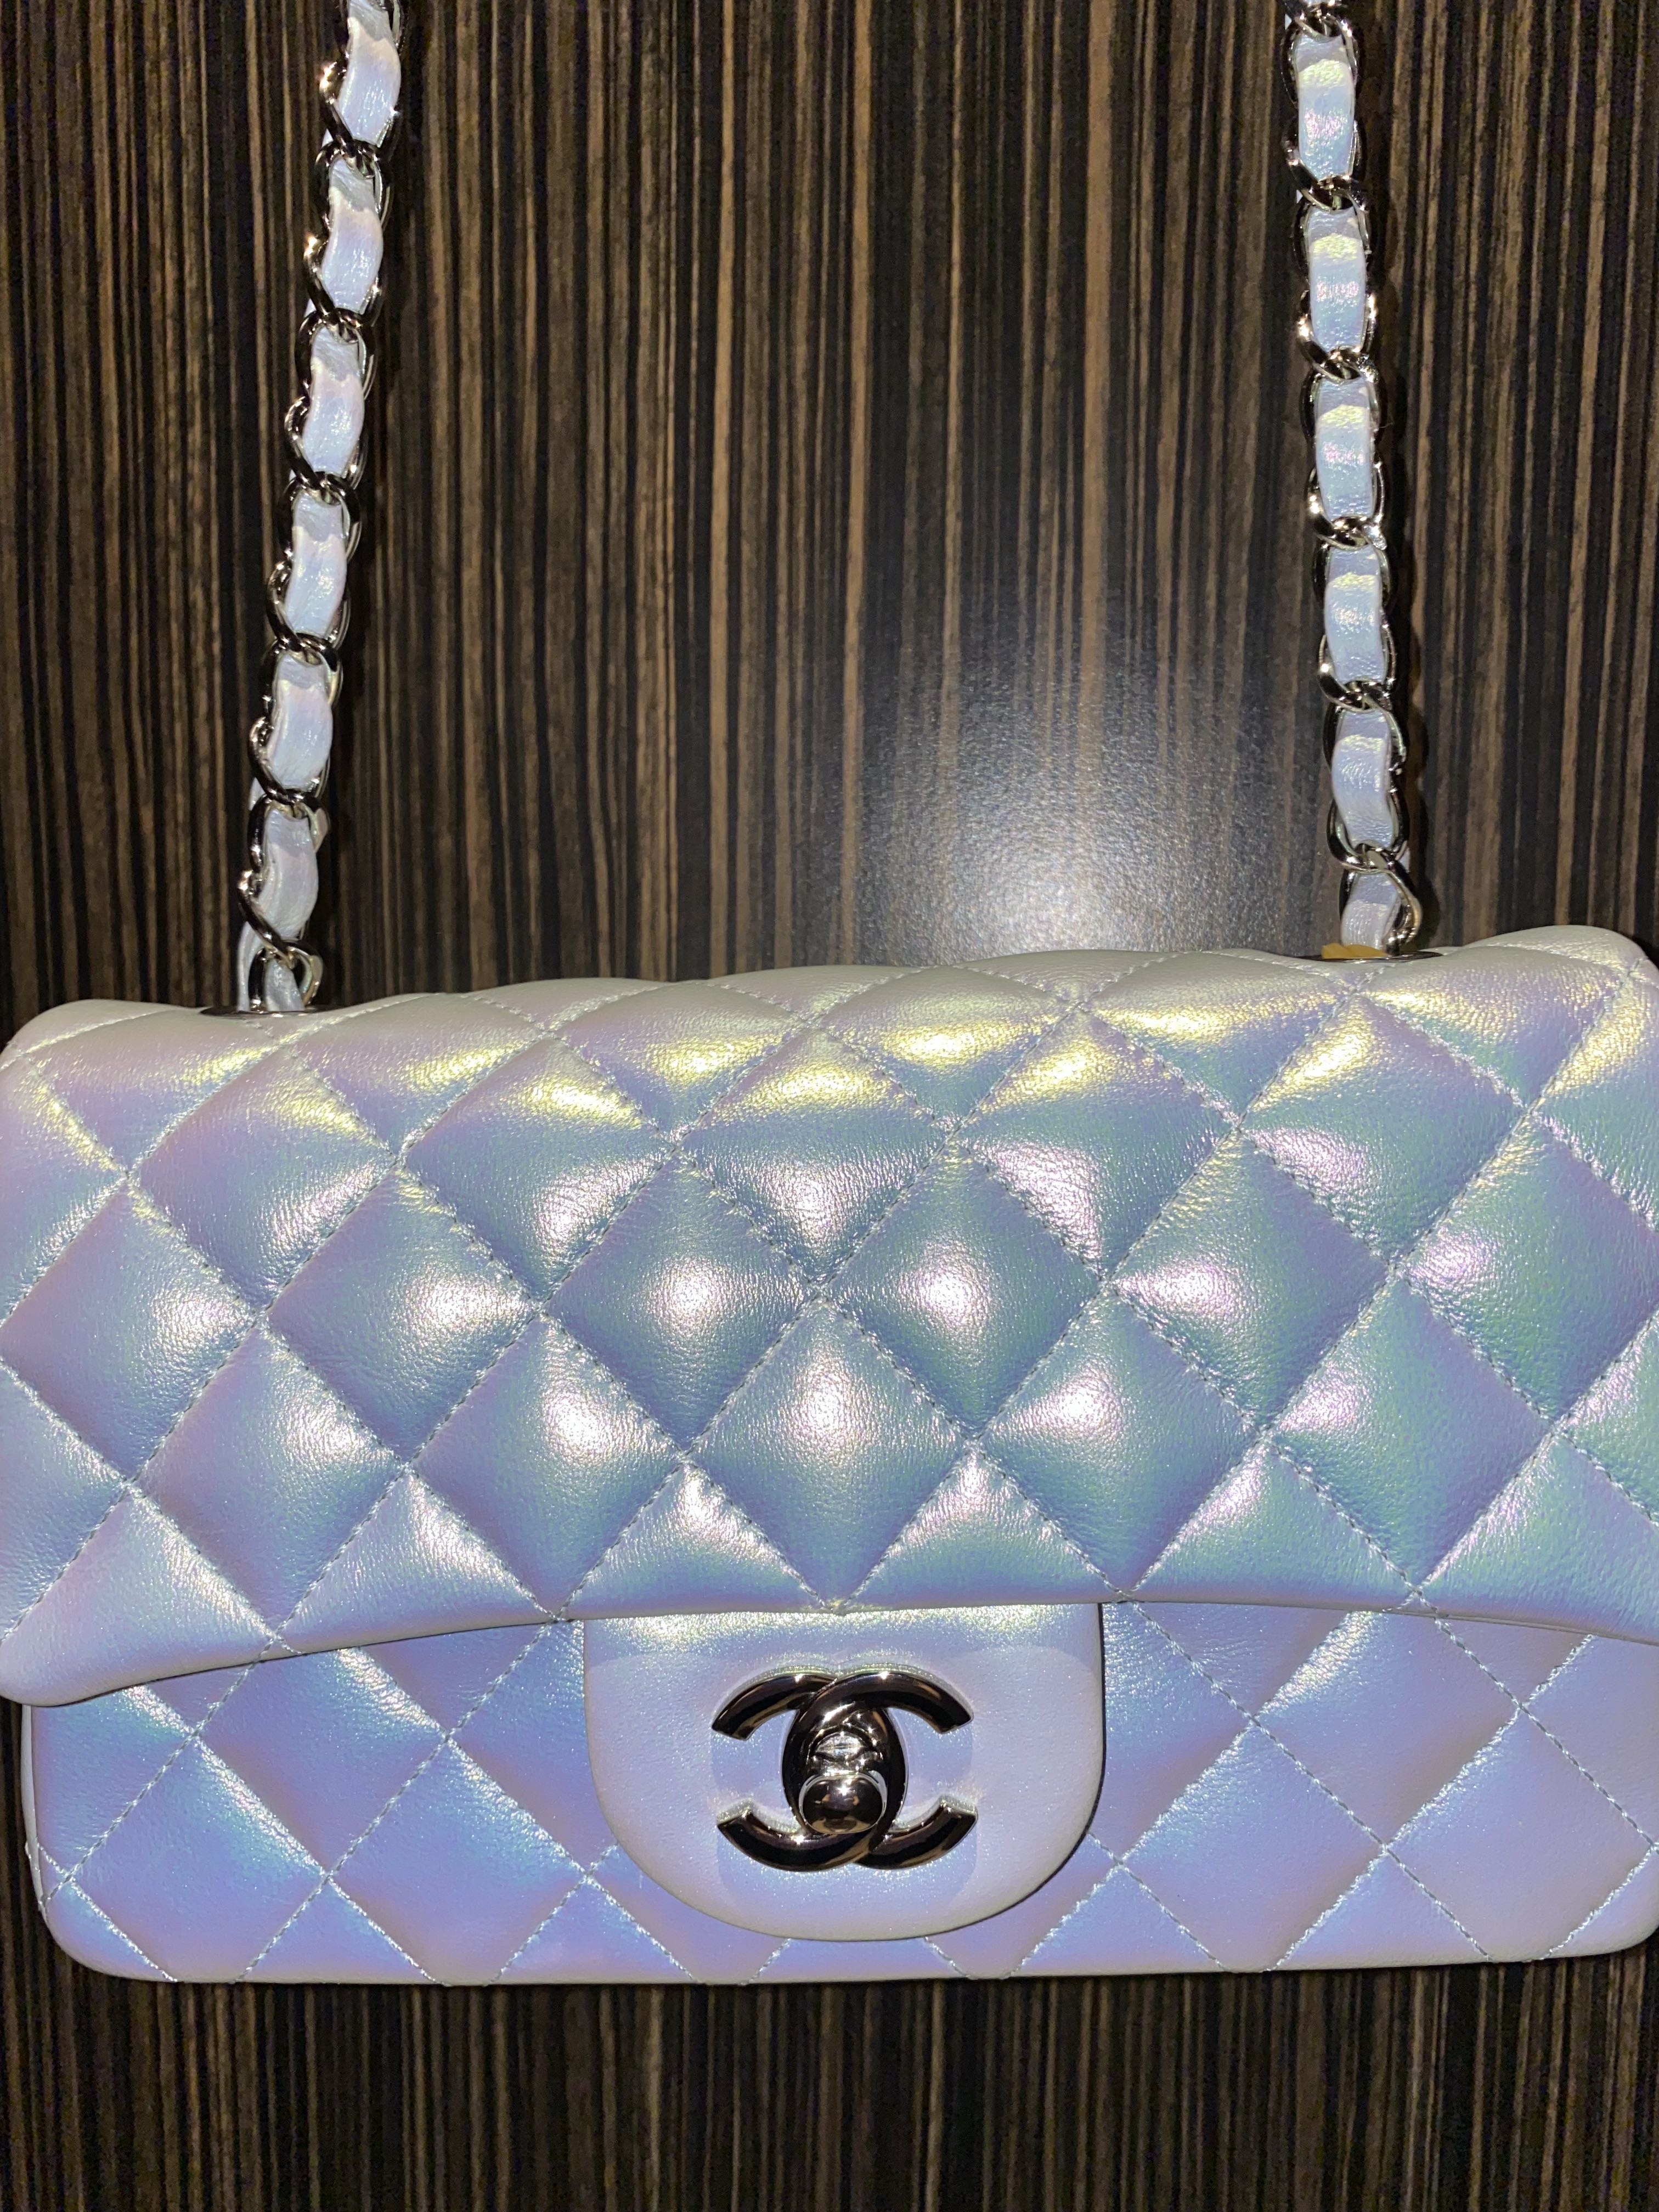 Chanel crossbody bag pearl iridescent white (blue and pink holographic)